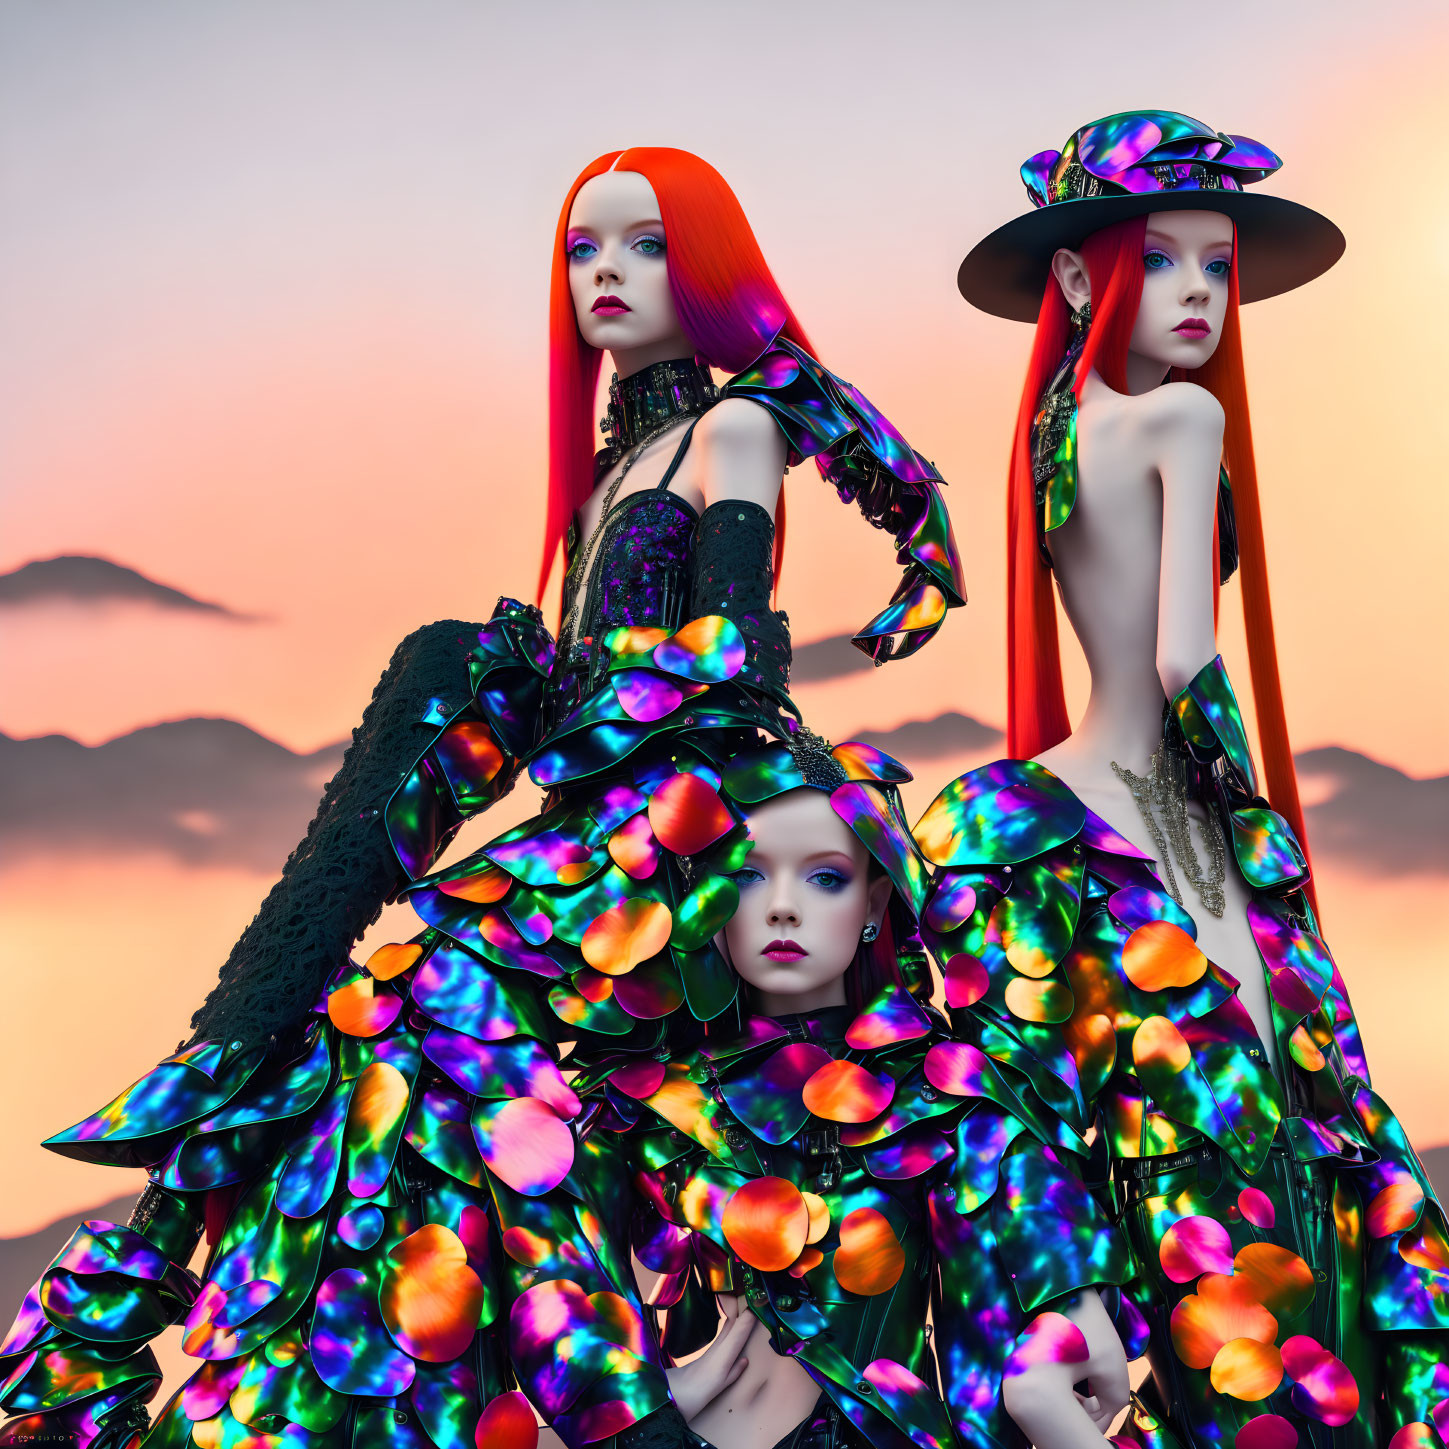 Mannequins with Red Hair in Flamboyant Dresses on Twilight Sky Backdrop